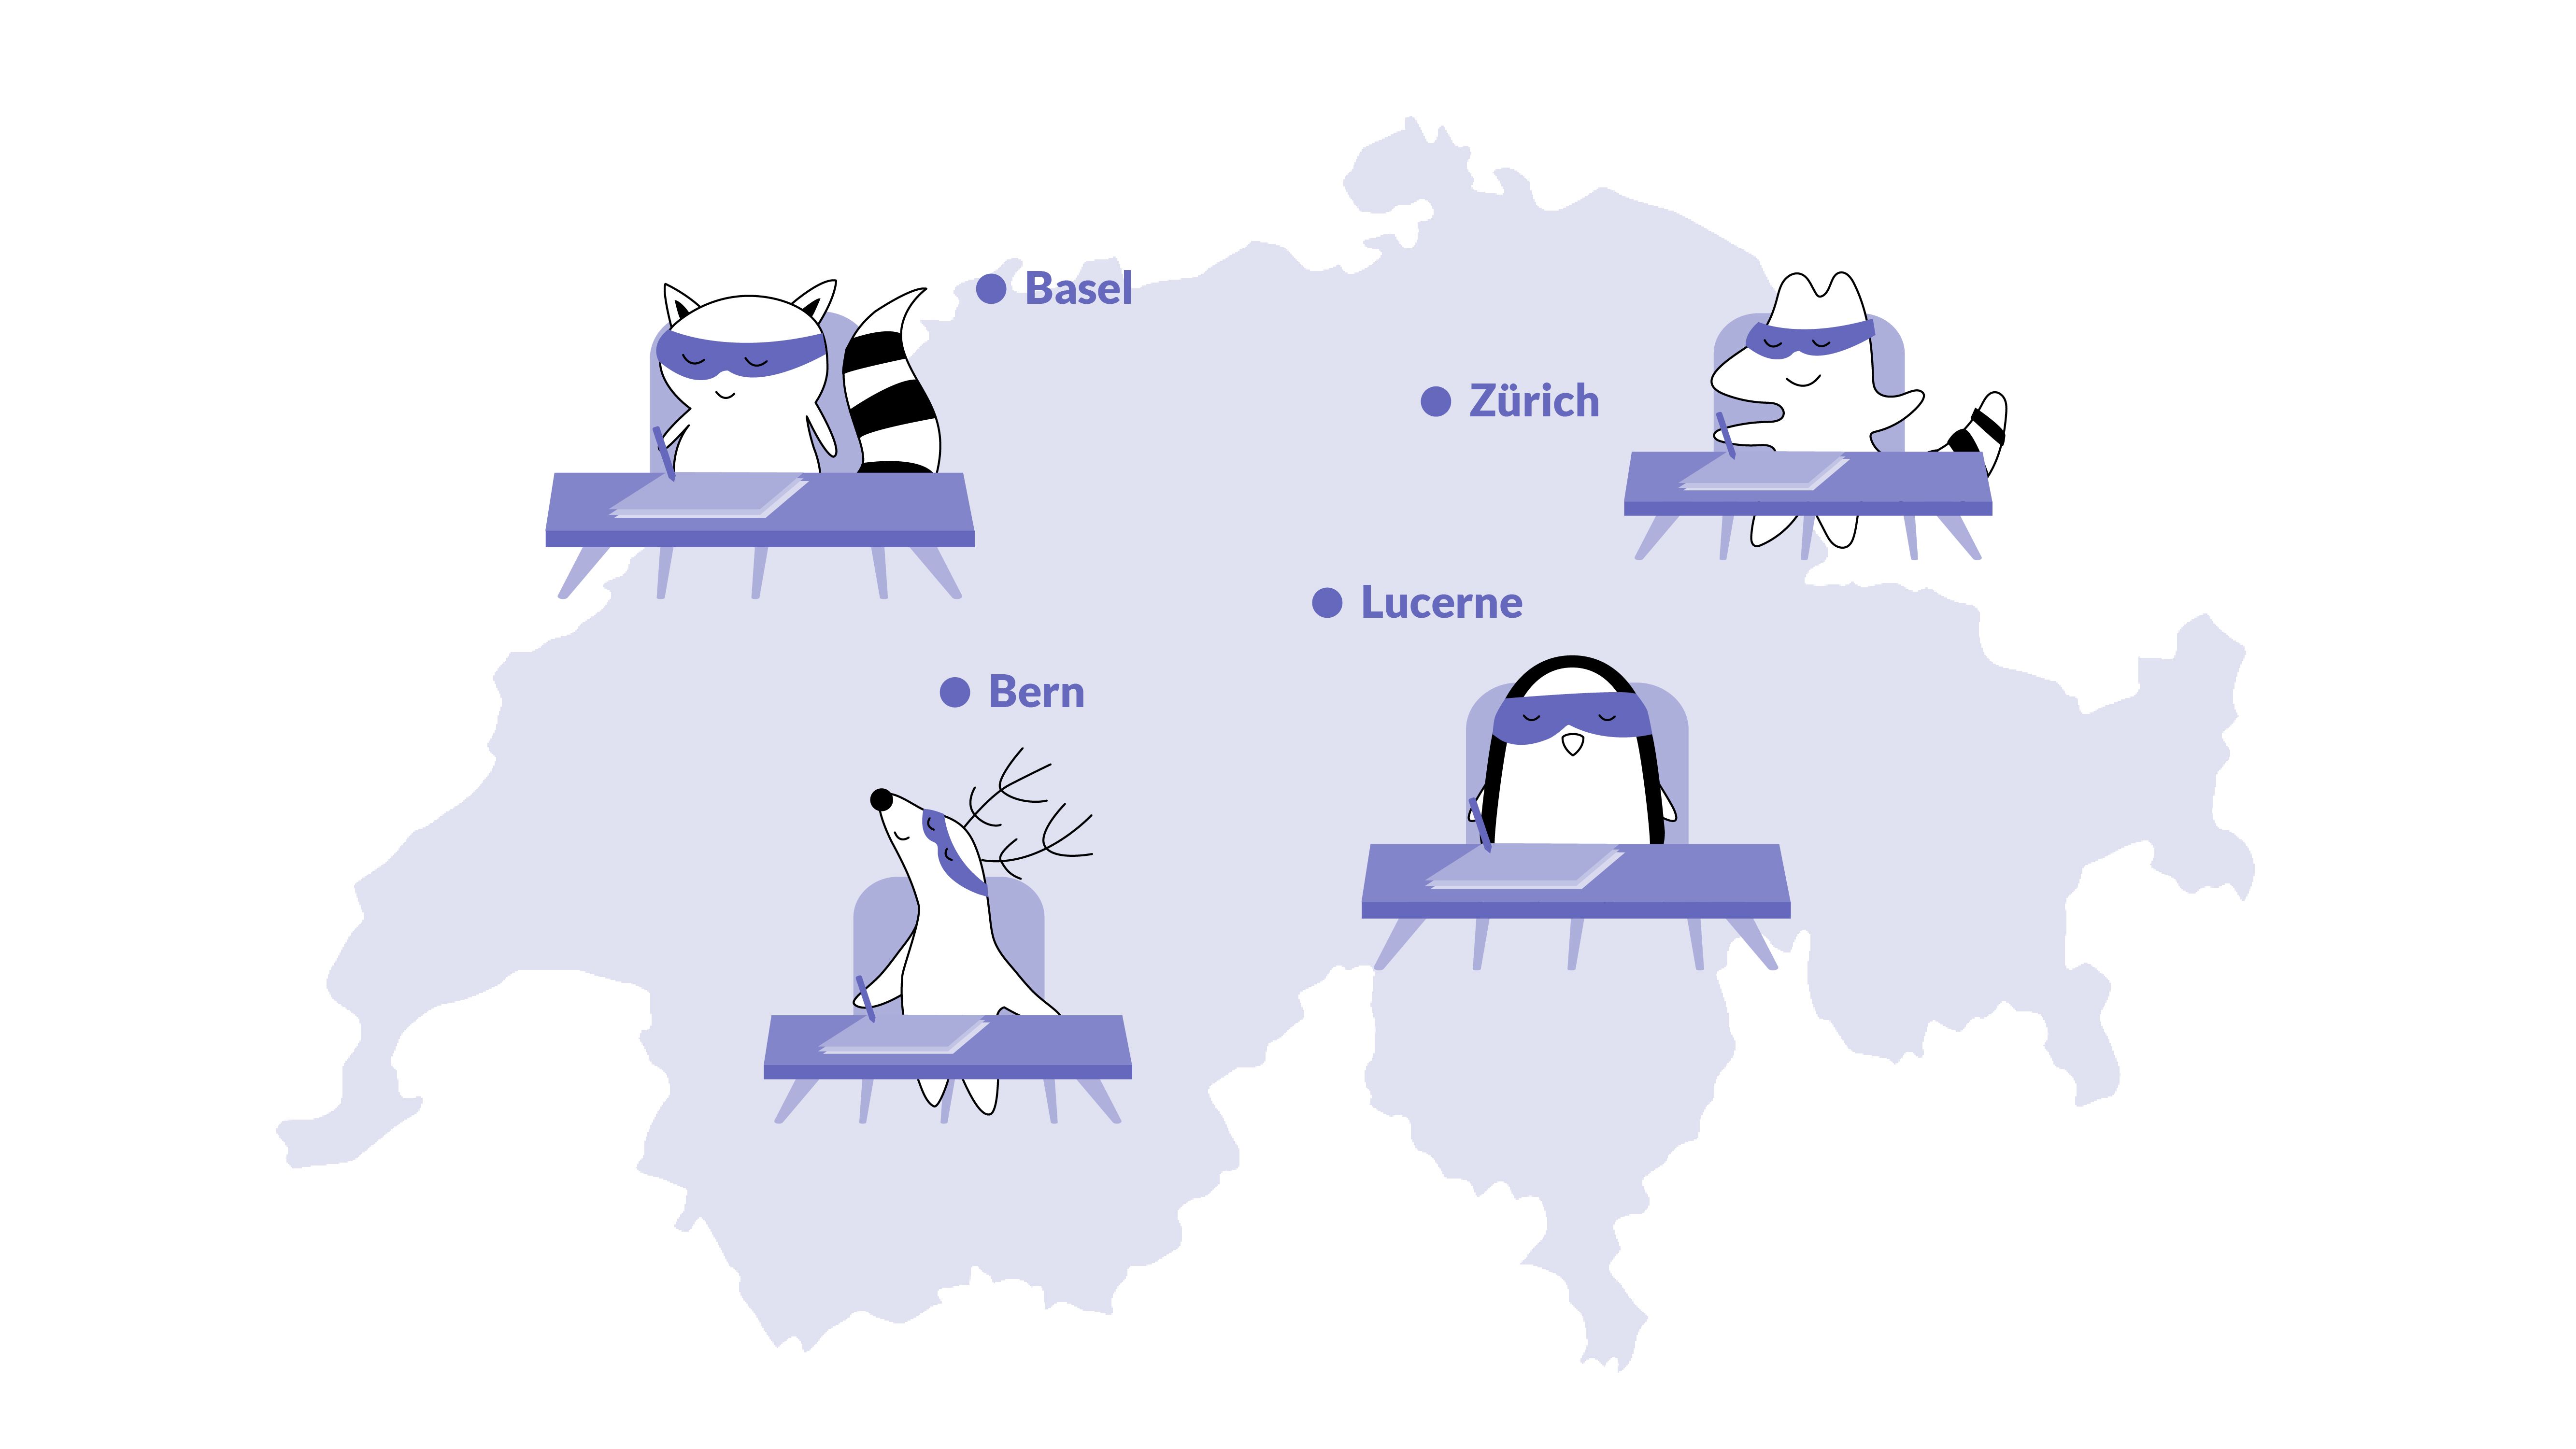 PLACEHOLDER] Iggy, Soren, Pocky, and Benji are placed on the map of Switzerland, taking tests, each in a different city — Zürich, Bern, Basel, and Lucerne.